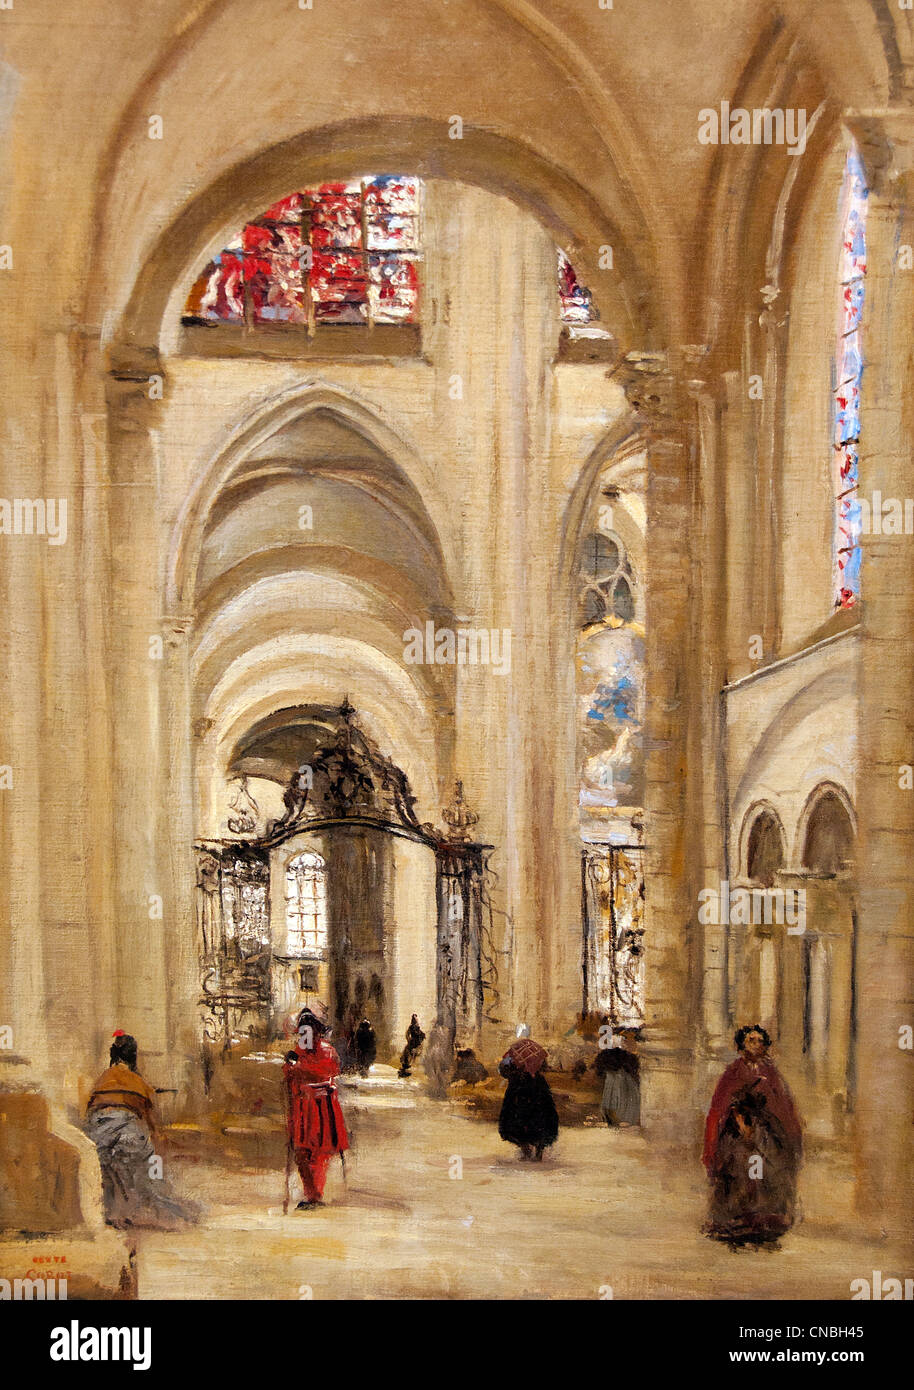 Cathedrale de Sens - Cathedral of Sens 1874 by Jean-Baptiste Camille Corot 1831 1796-1875  Paris France French Stock Photo